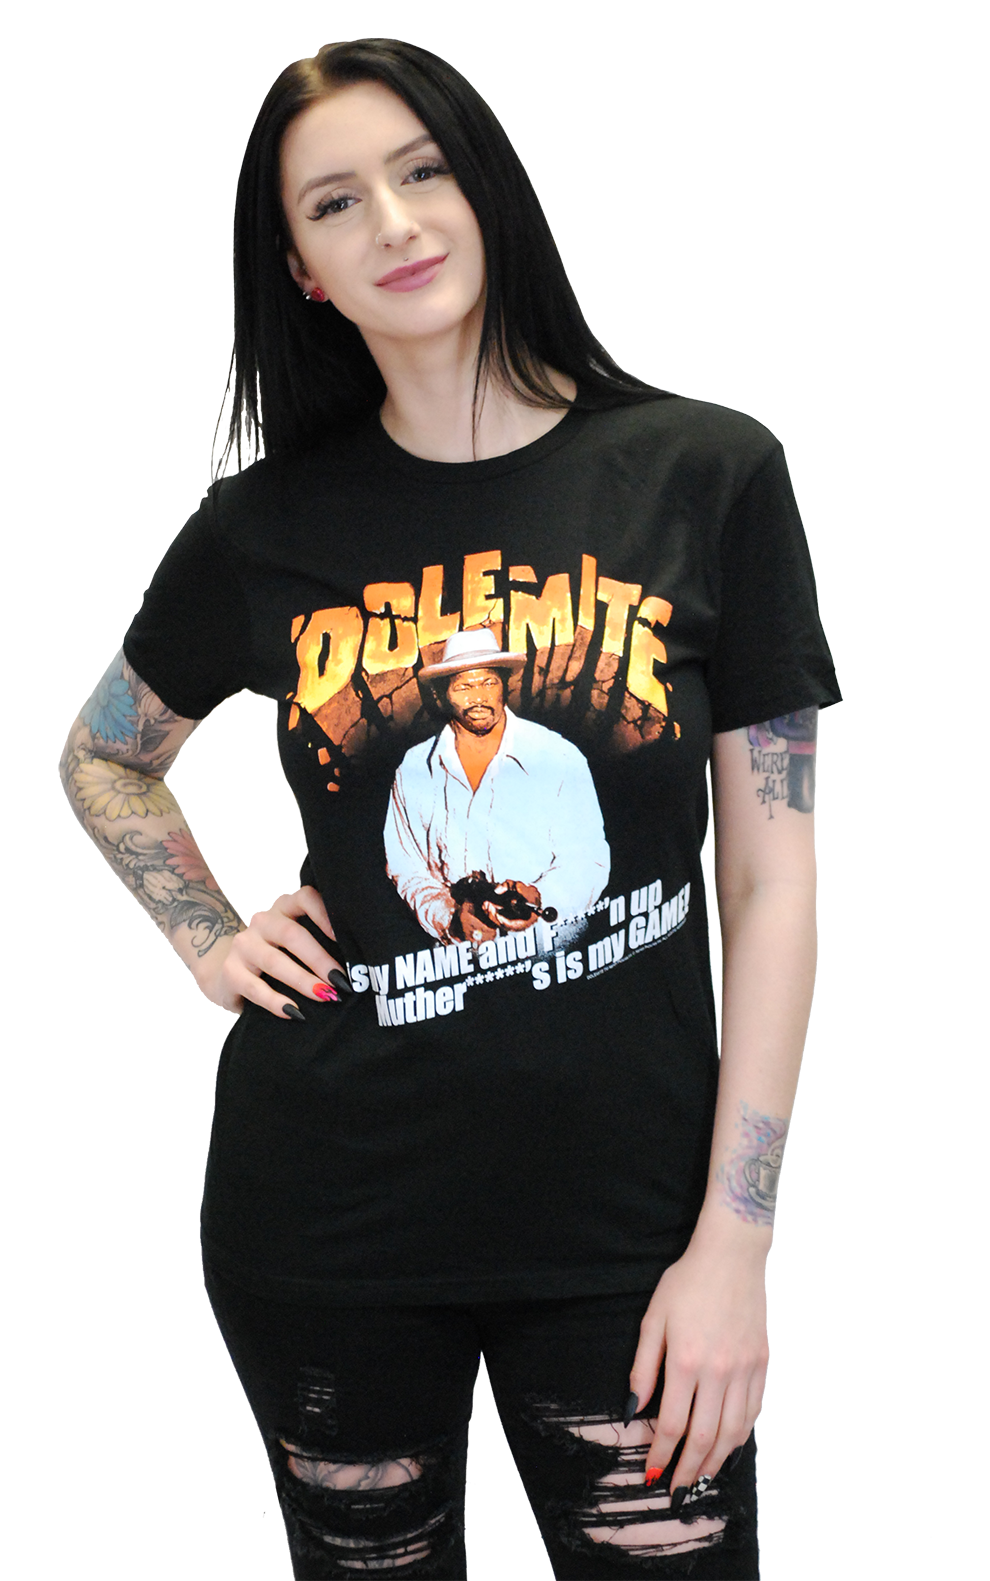 RUDY RAY MOORE "DOLEMITE IS MY NAME" T-SHIRT